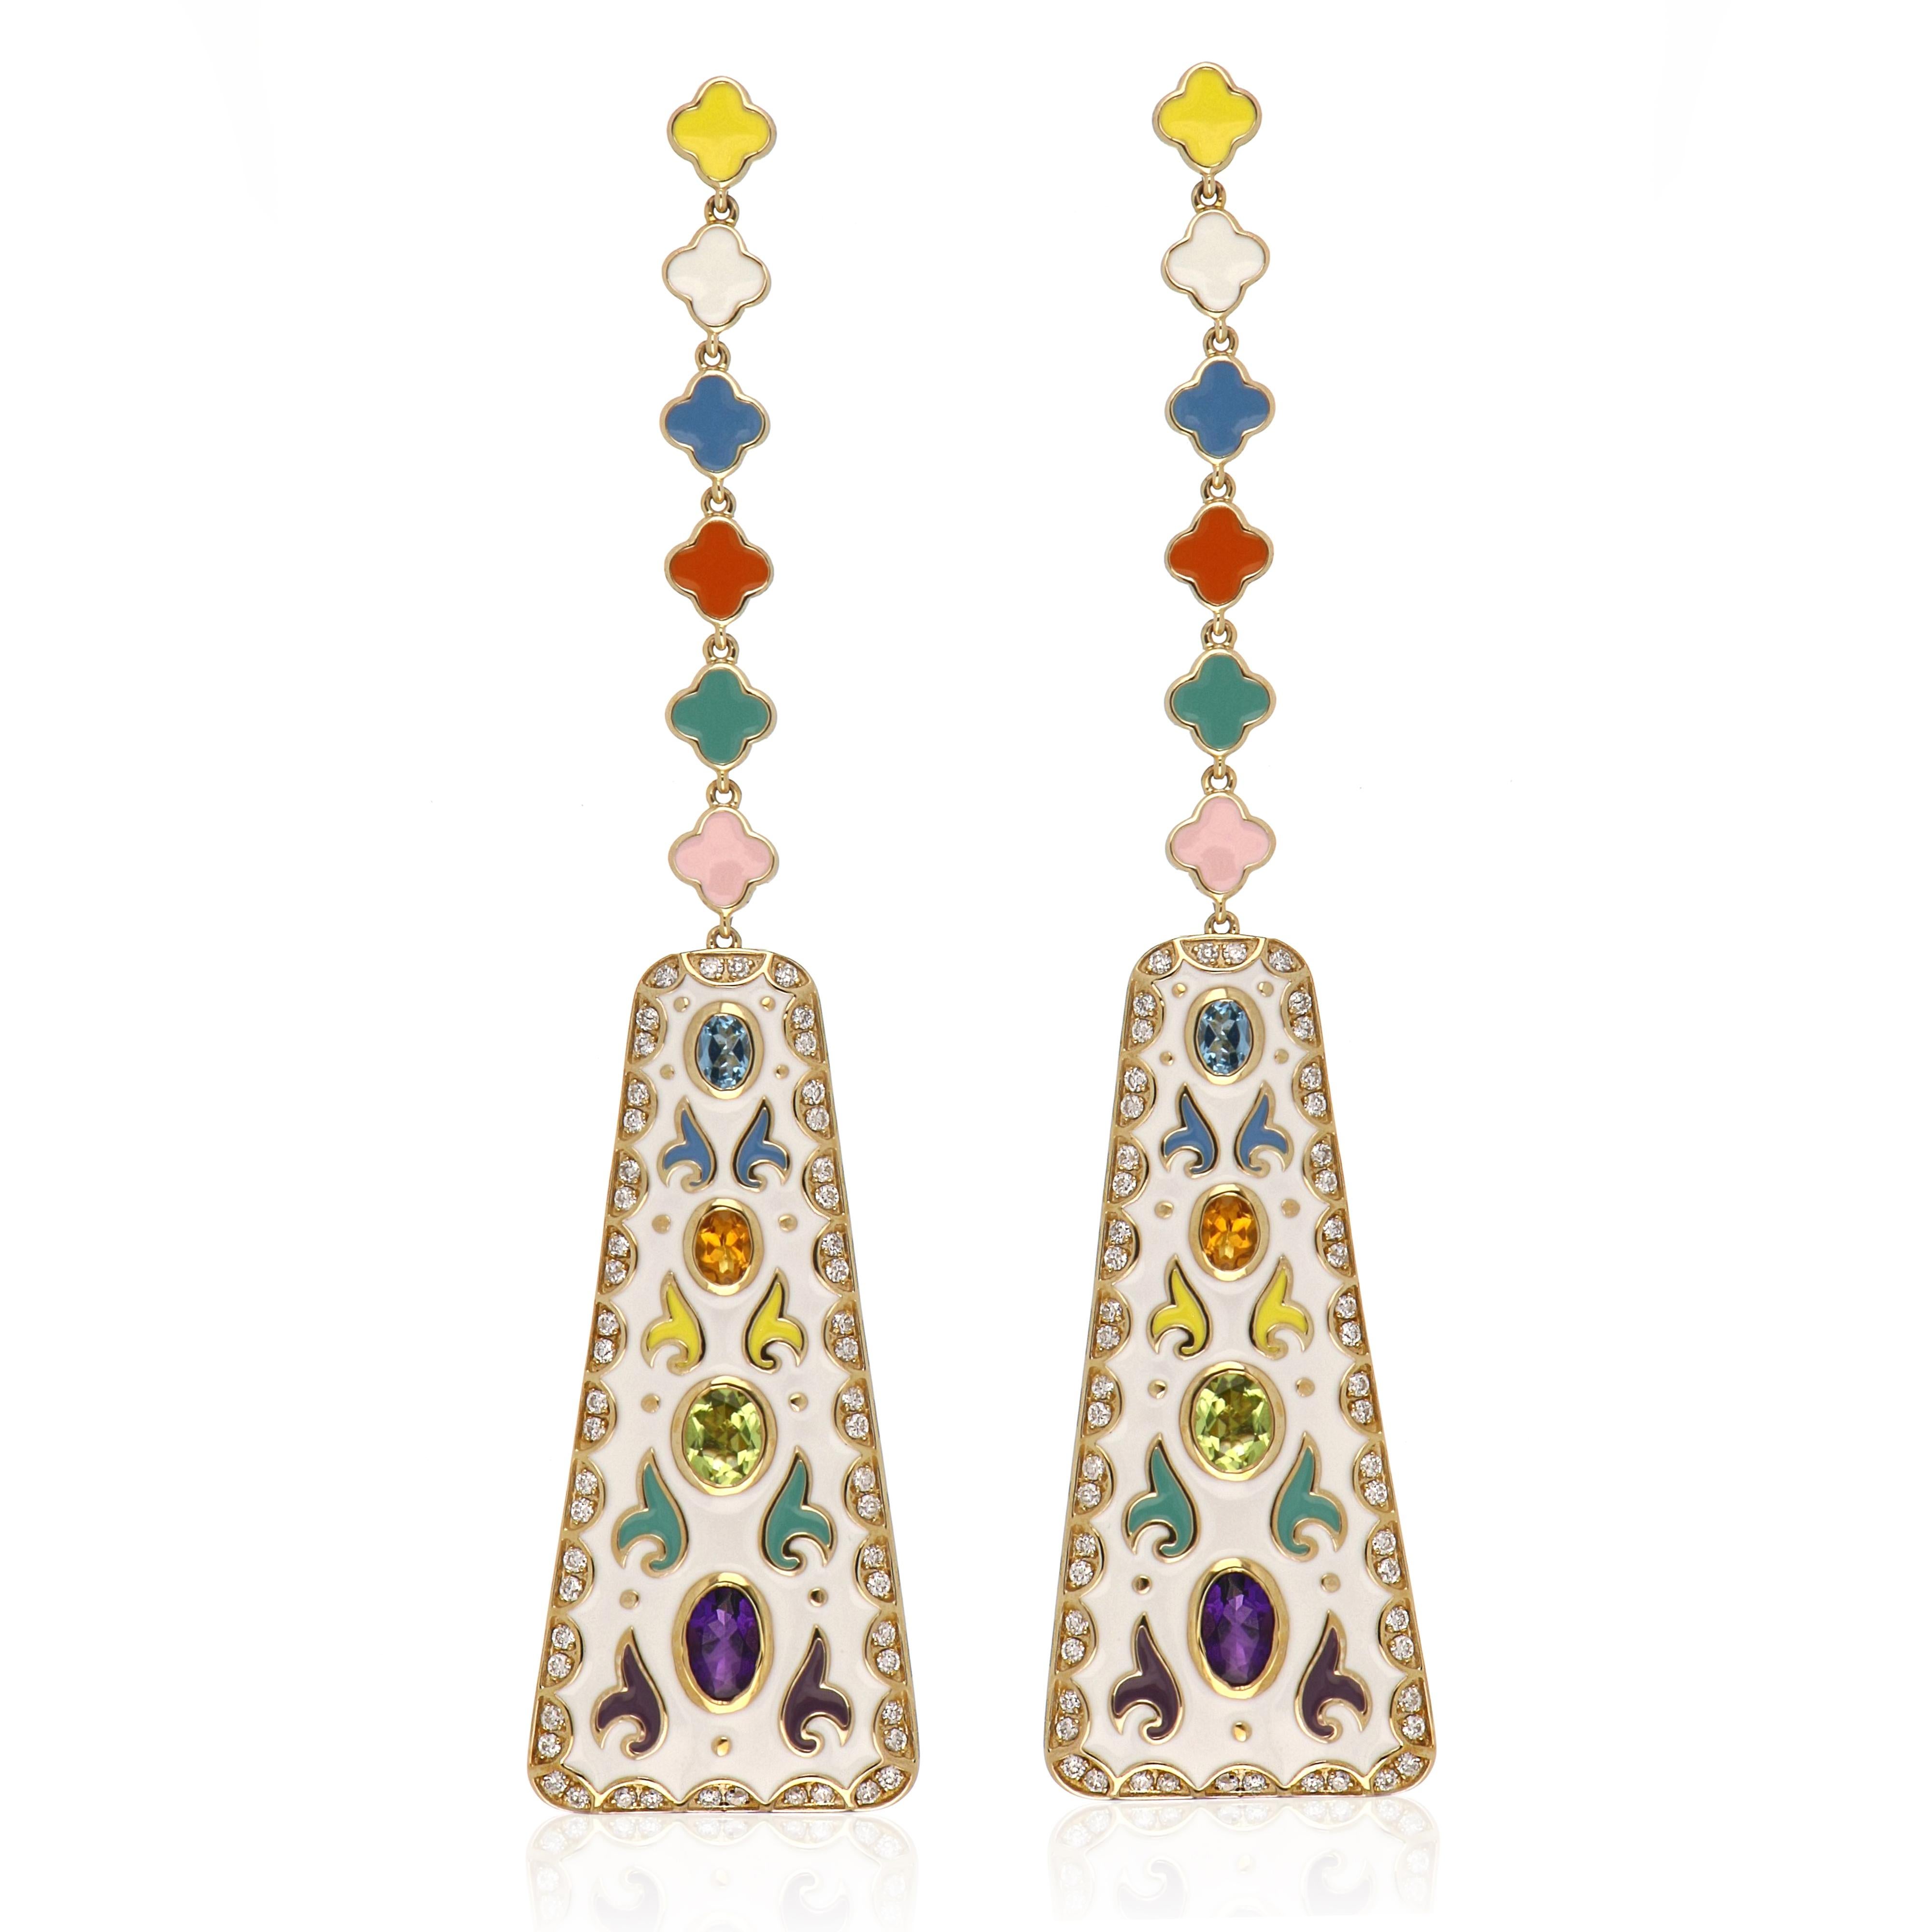 Elegant and exquisite Multi Color Enamel Cocktail 14 K Earring, set with Oval Cut Amethyst 0.92 Cts (Total), Swiss Blue Topaz 0.36 Cts. (Total), Citrine 0.35 Cts. (Total) and Peridot 0.72 Cts. (Total) accented with Diamonds, weighing approx. 0.68